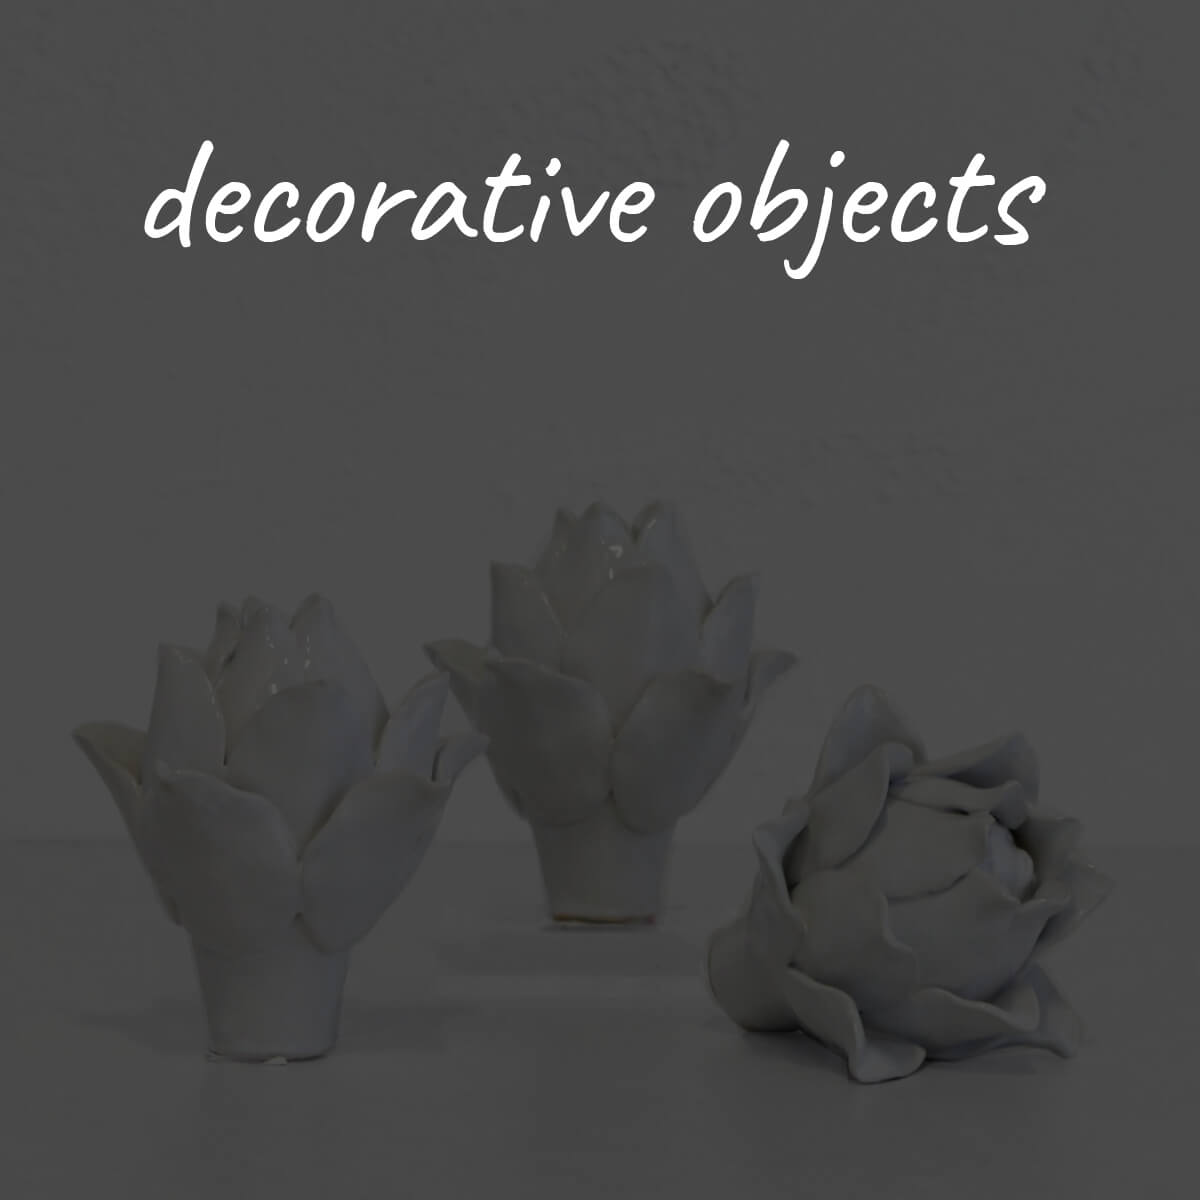 Decorative objects